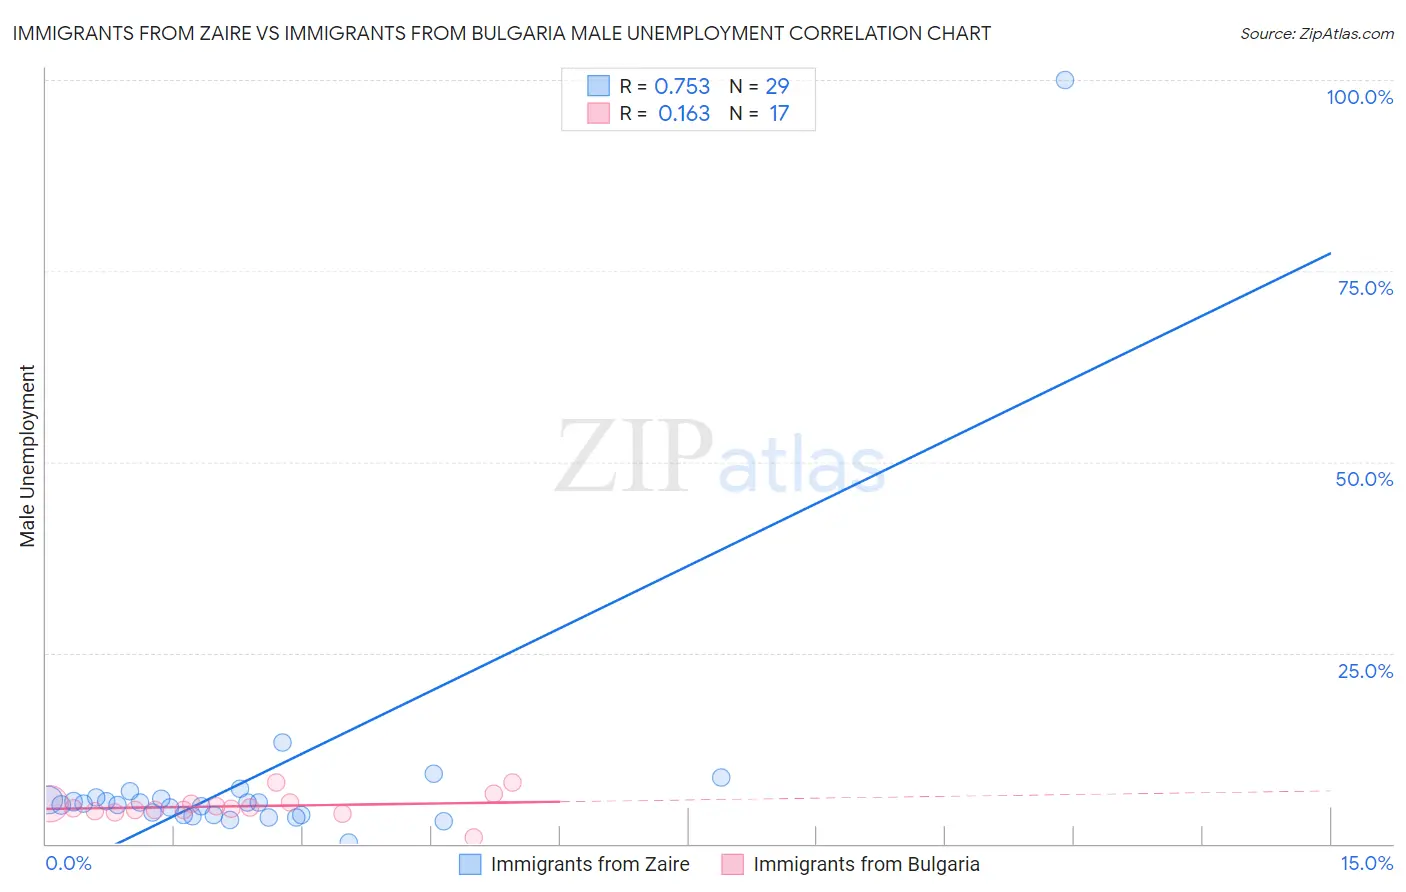 Immigrants from Zaire vs Immigrants from Bulgaria Male Unemployment